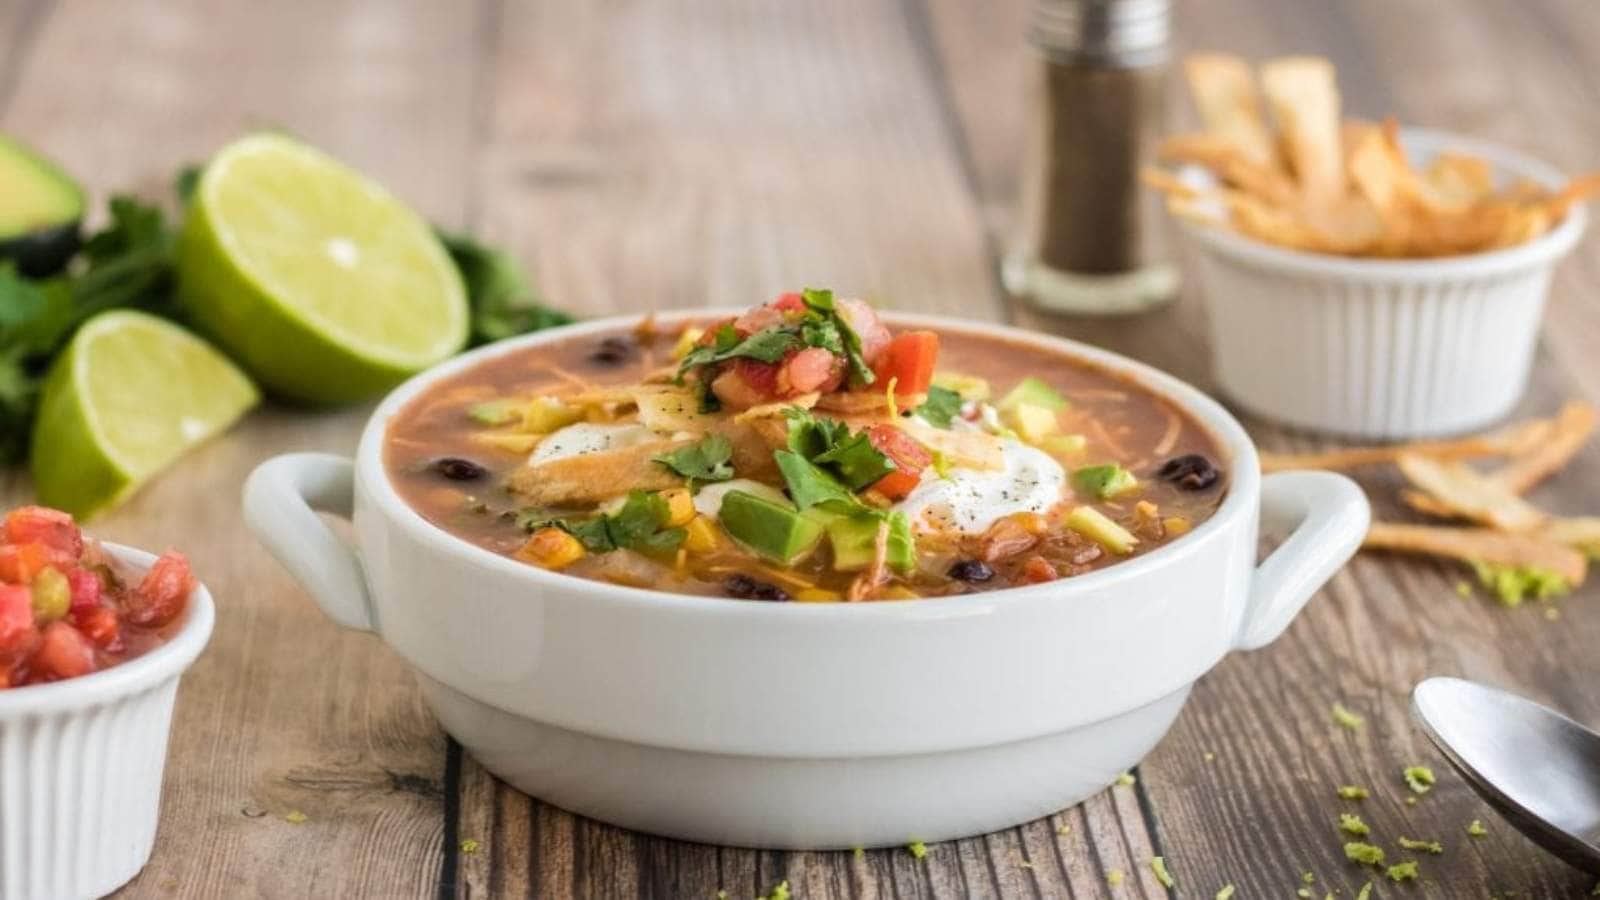 Chicken Tortilla Soup recipe by Confessions Of Parenting.